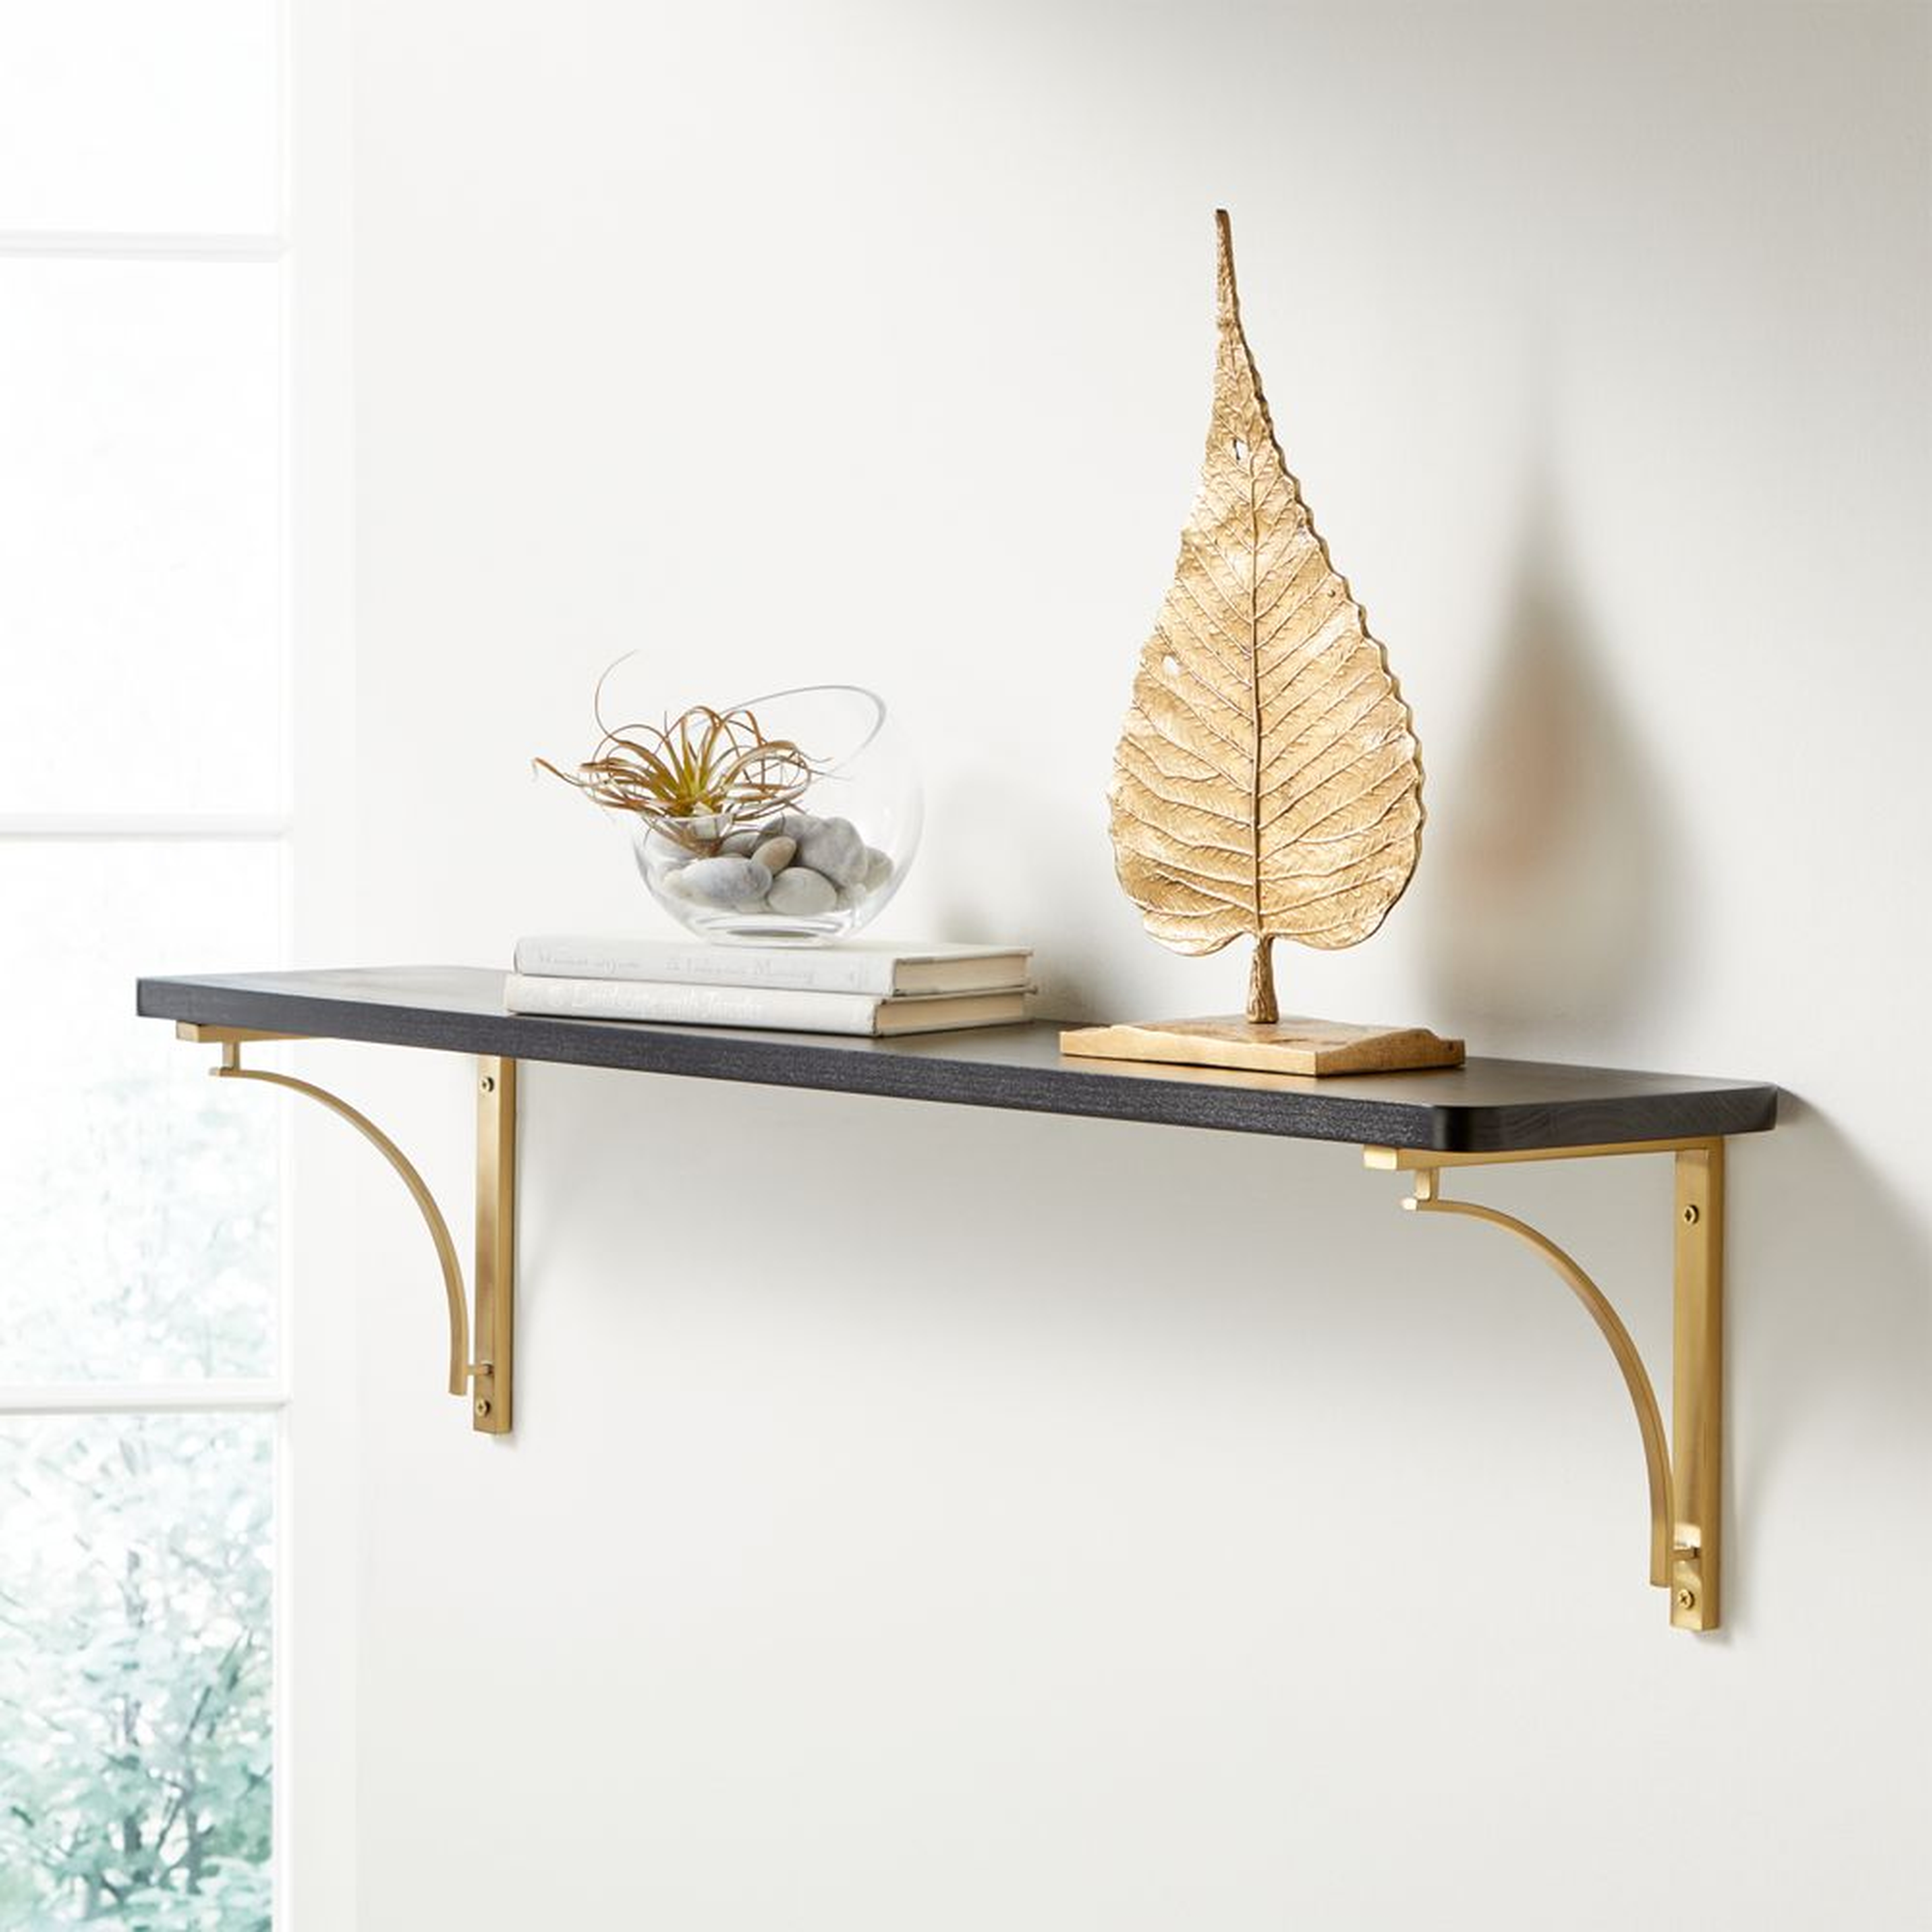 Riggs 36" Black Shelf with Brass Arc Brackets - Crate and Barrel